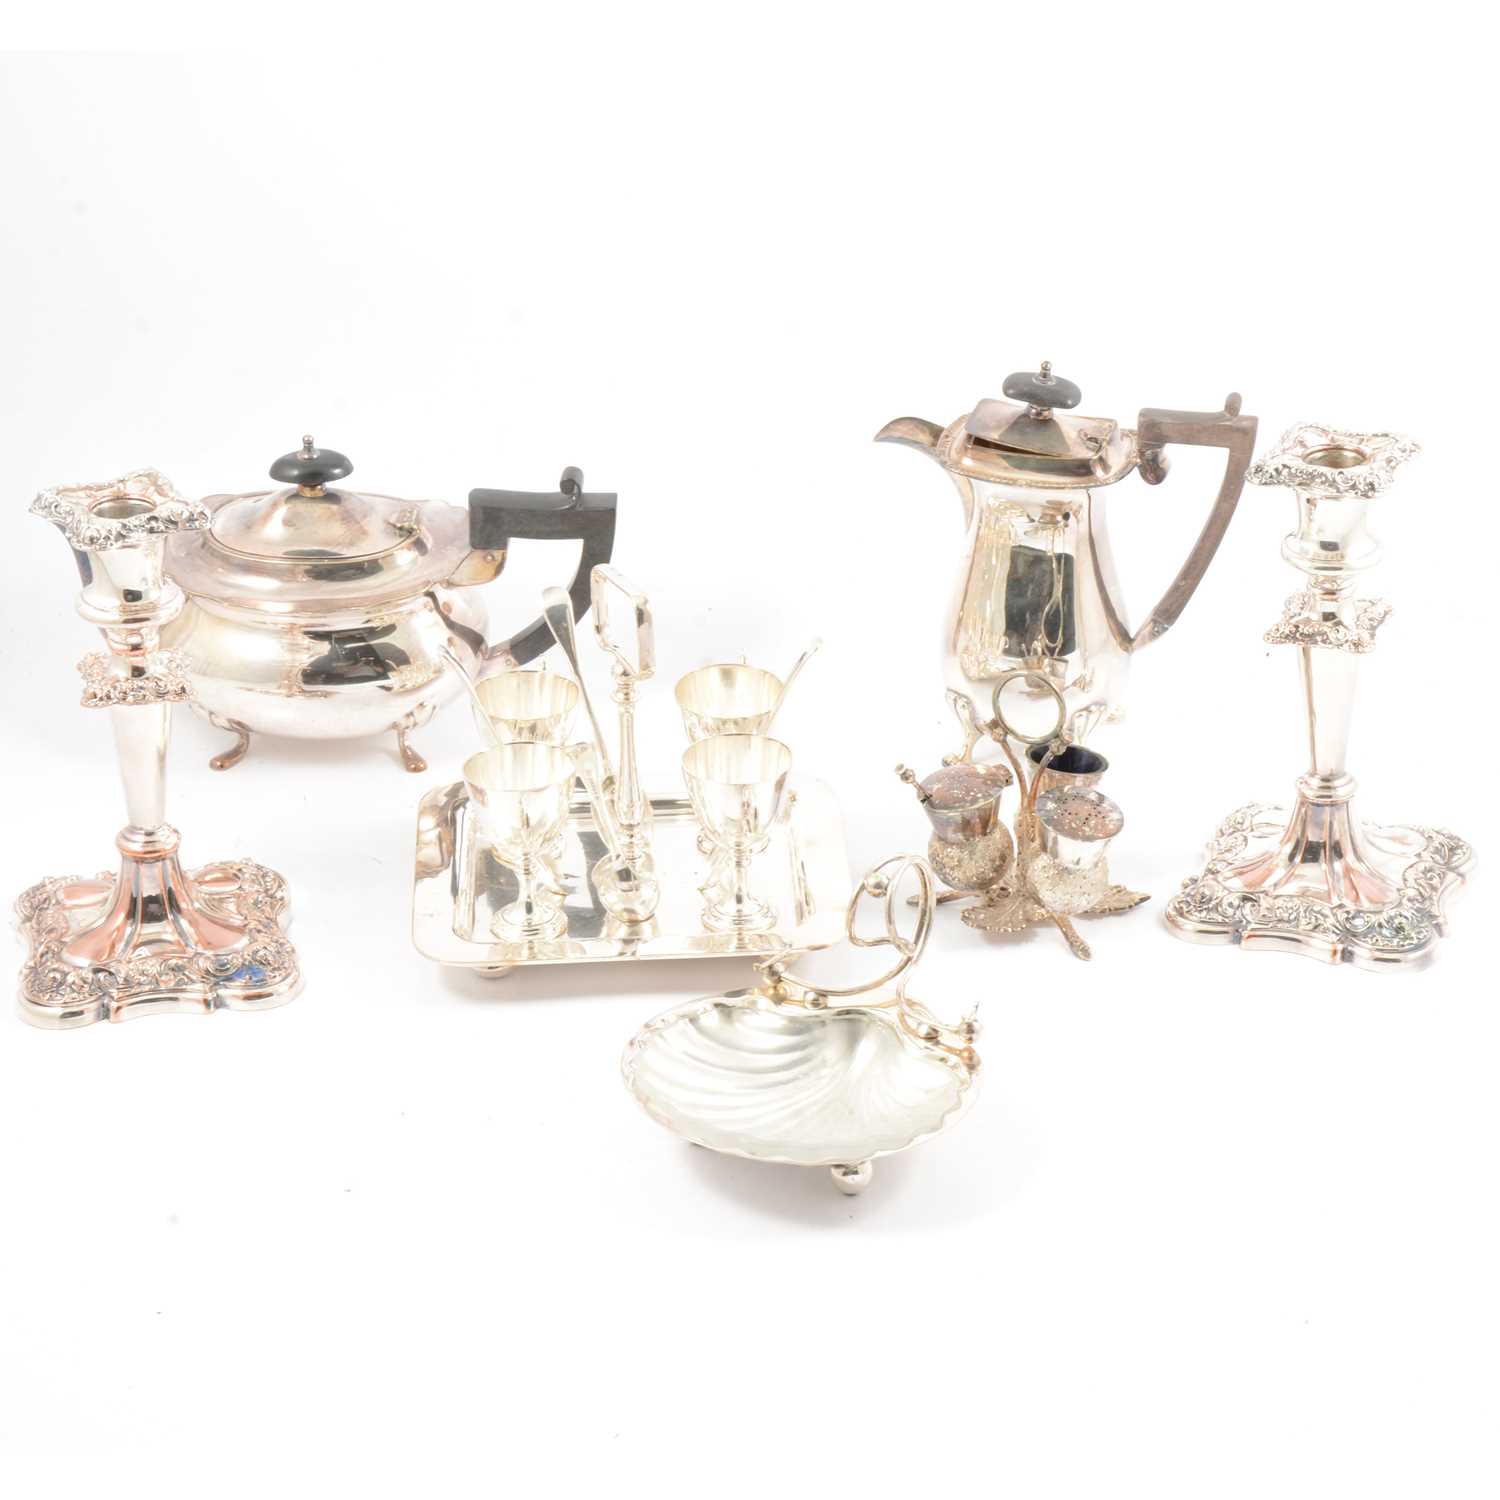 Lot 78 - Silver-plated teasets, thistle cruet, eggcup and spoon set, and other plated wares.